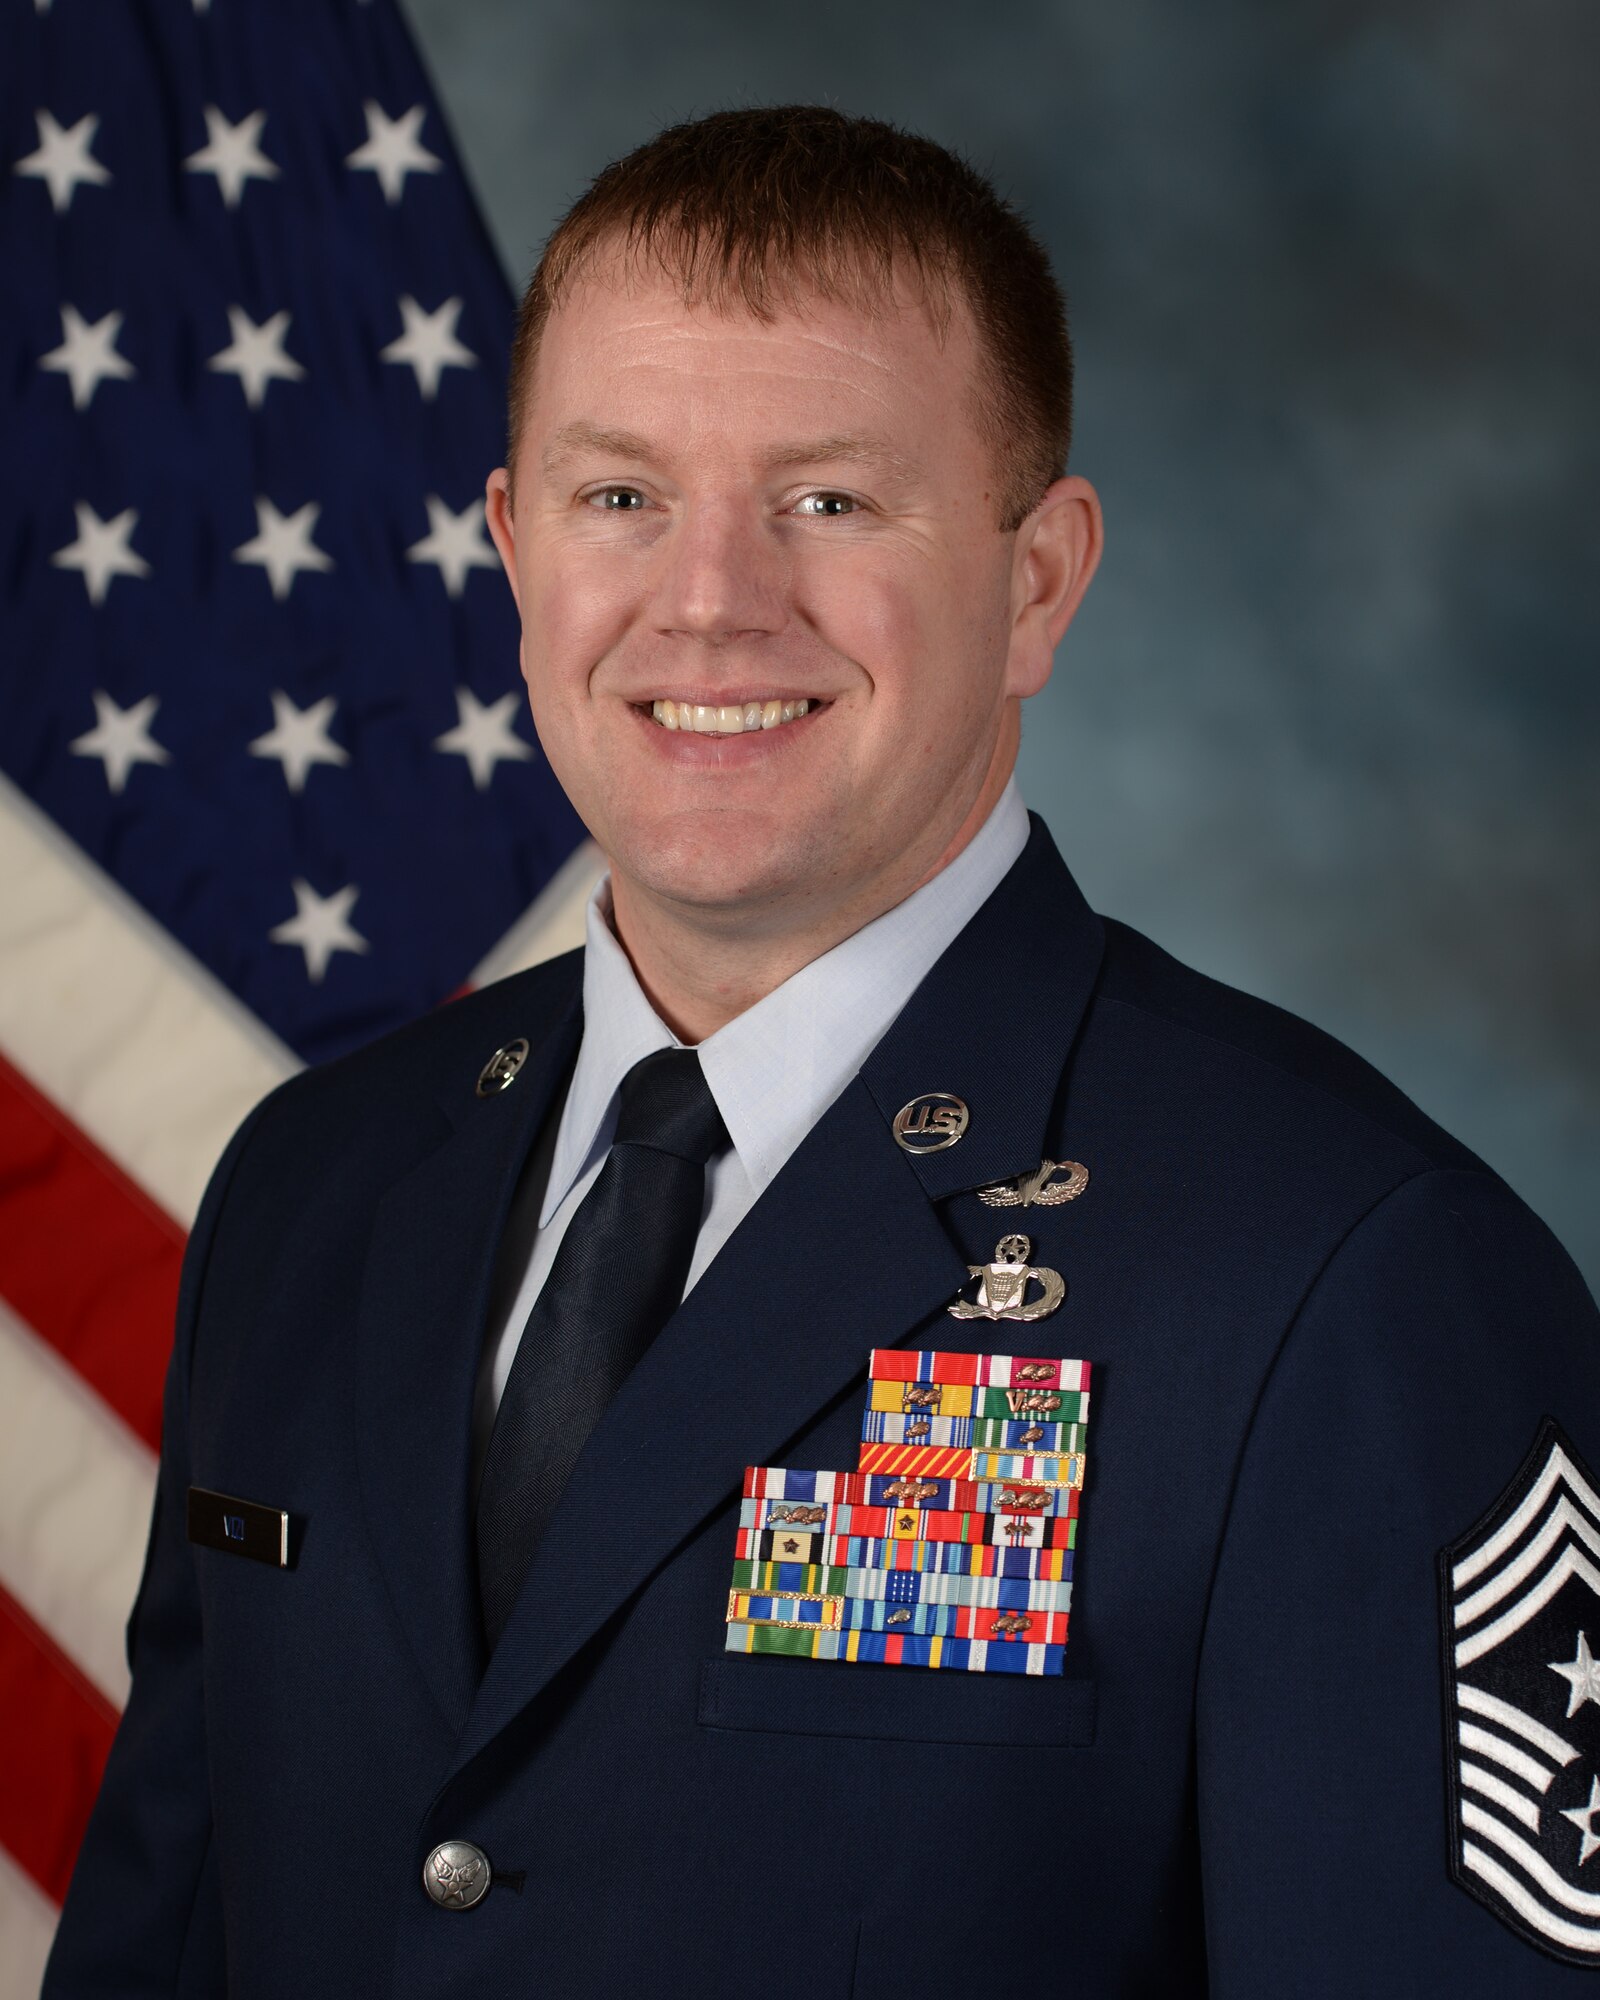 Chief Master Sgt. Adam J. Vizi is the command chief master sergeant of the 28th Bomb Wing. (U.S. Air Force photo by Senior Airman Anania Tekurio)